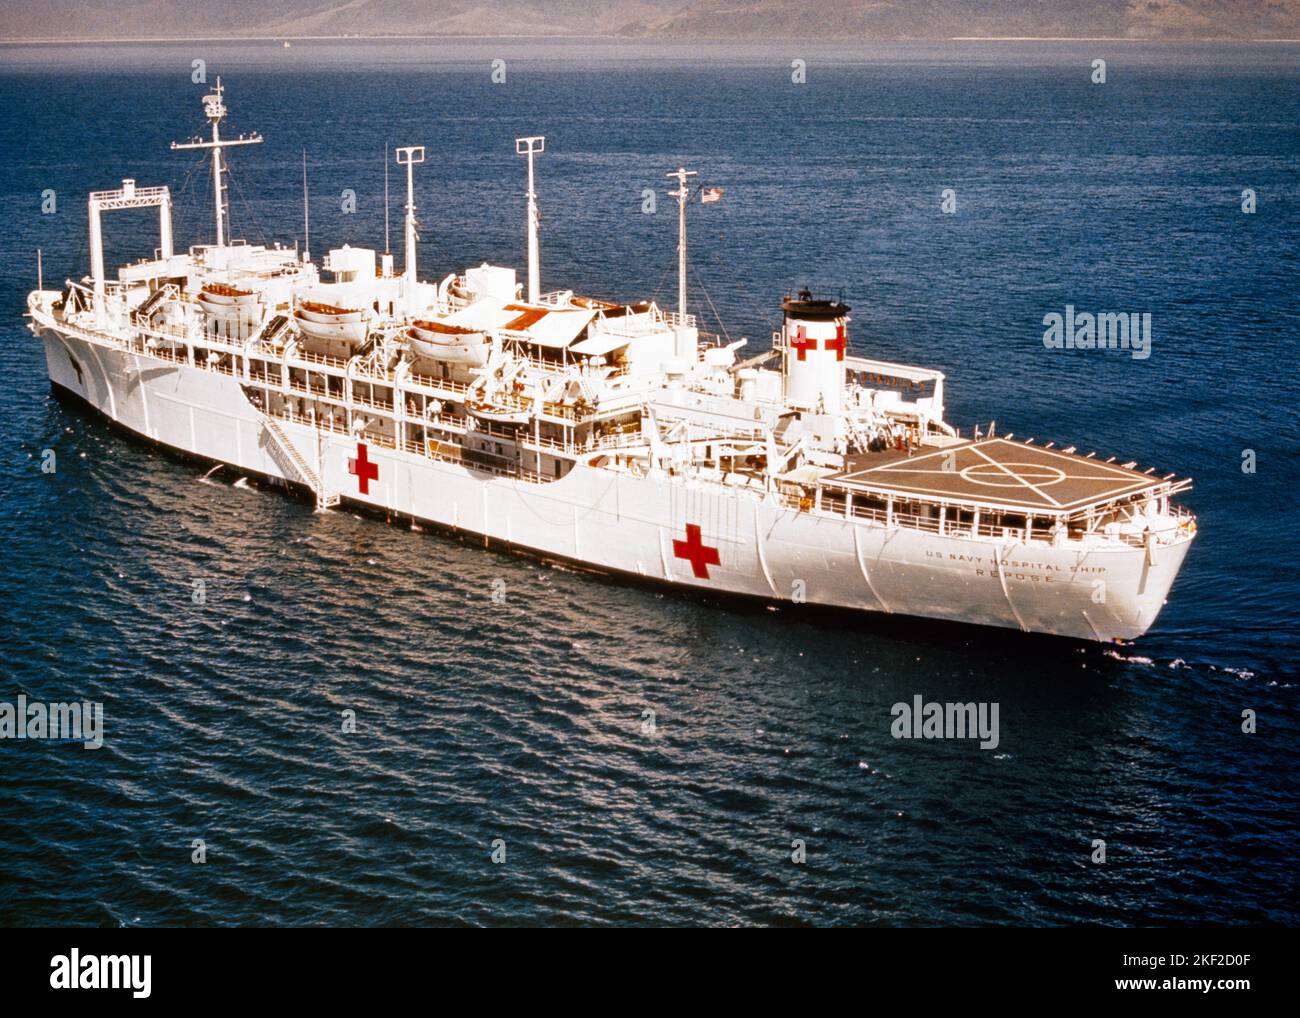 1960s UNITED STATES NAVY HOSPITAL SHIP USS REPOSE ON STATION IN DANANG HARBOR DURING THE VIETNAM WAR 1965 TO 1970 SOUTH VIETNAM - km1341 HAR001 HARS WARS HIGH ANGLE HEALING NAVAL 1965 PRIDE HEALTH CARE OF TO IMPAIRMENT OCCUPATIONS TREATMENT UNIFORMS CONCEPT FORCES CONCEPTUAL HOSPITALS NAVIES RED CROSS UNITED STATES NAVY FACILITY FACILITIES FREIGHTER SYMBOLIC CONCEPTS SHIPPING DURING HAR001 OLD FASHIONED REPRESENTATION VESSEL Stock Photo